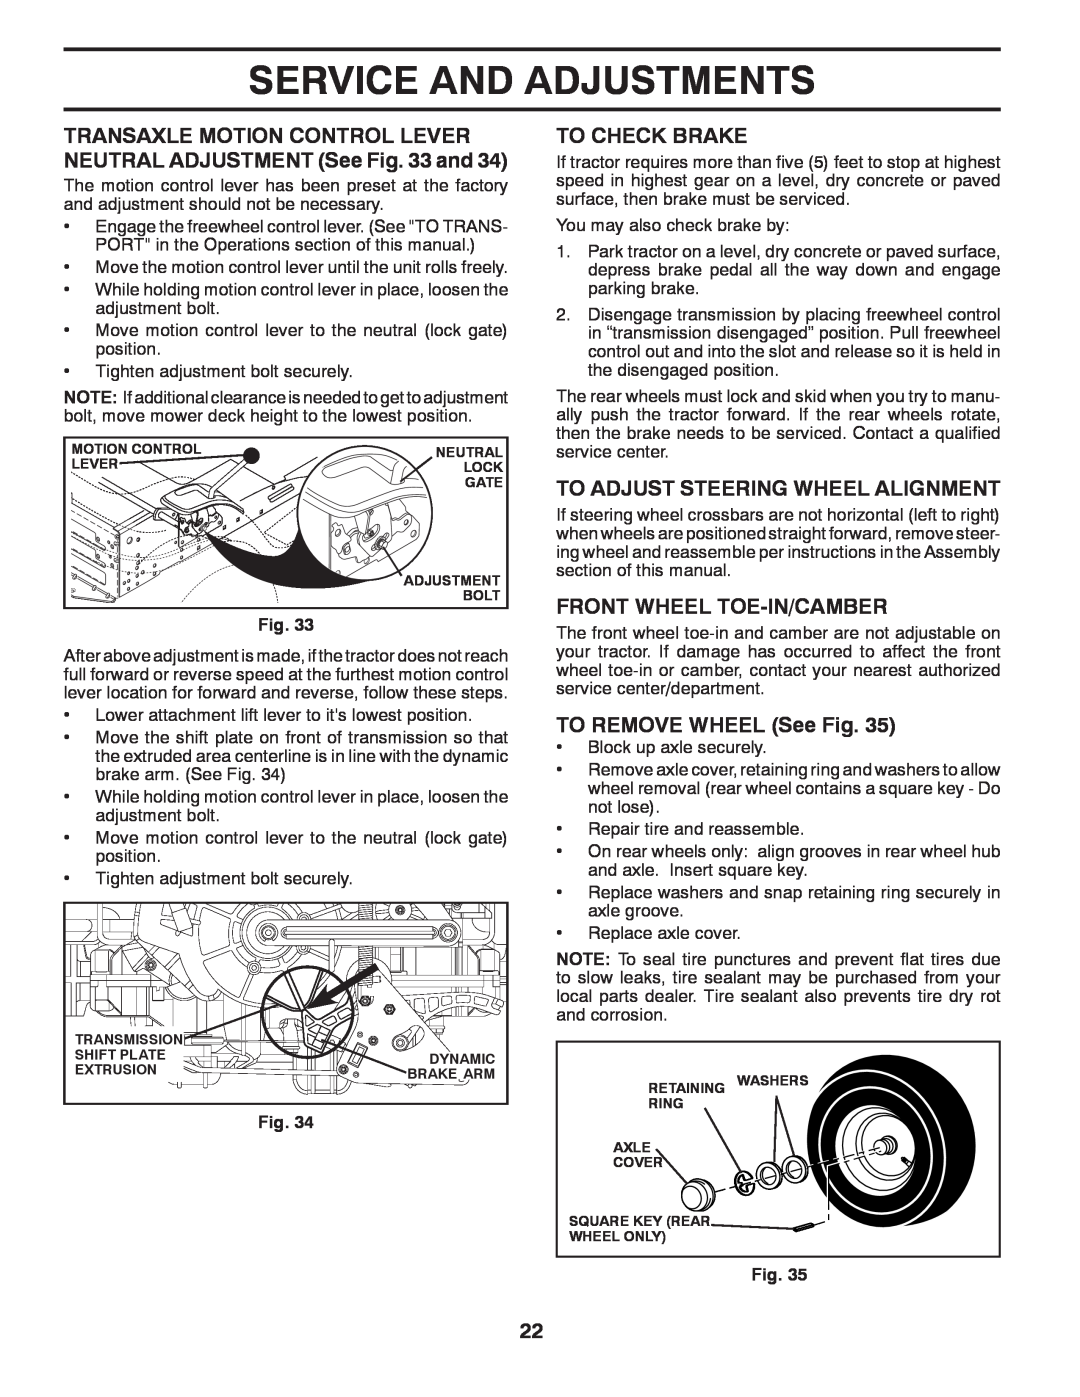 Ariens 935335 42 Service And Adjustments, To Check Brake, To Adjust Steering Wheel Alignment, Front Wheel Toe-In/Camber 